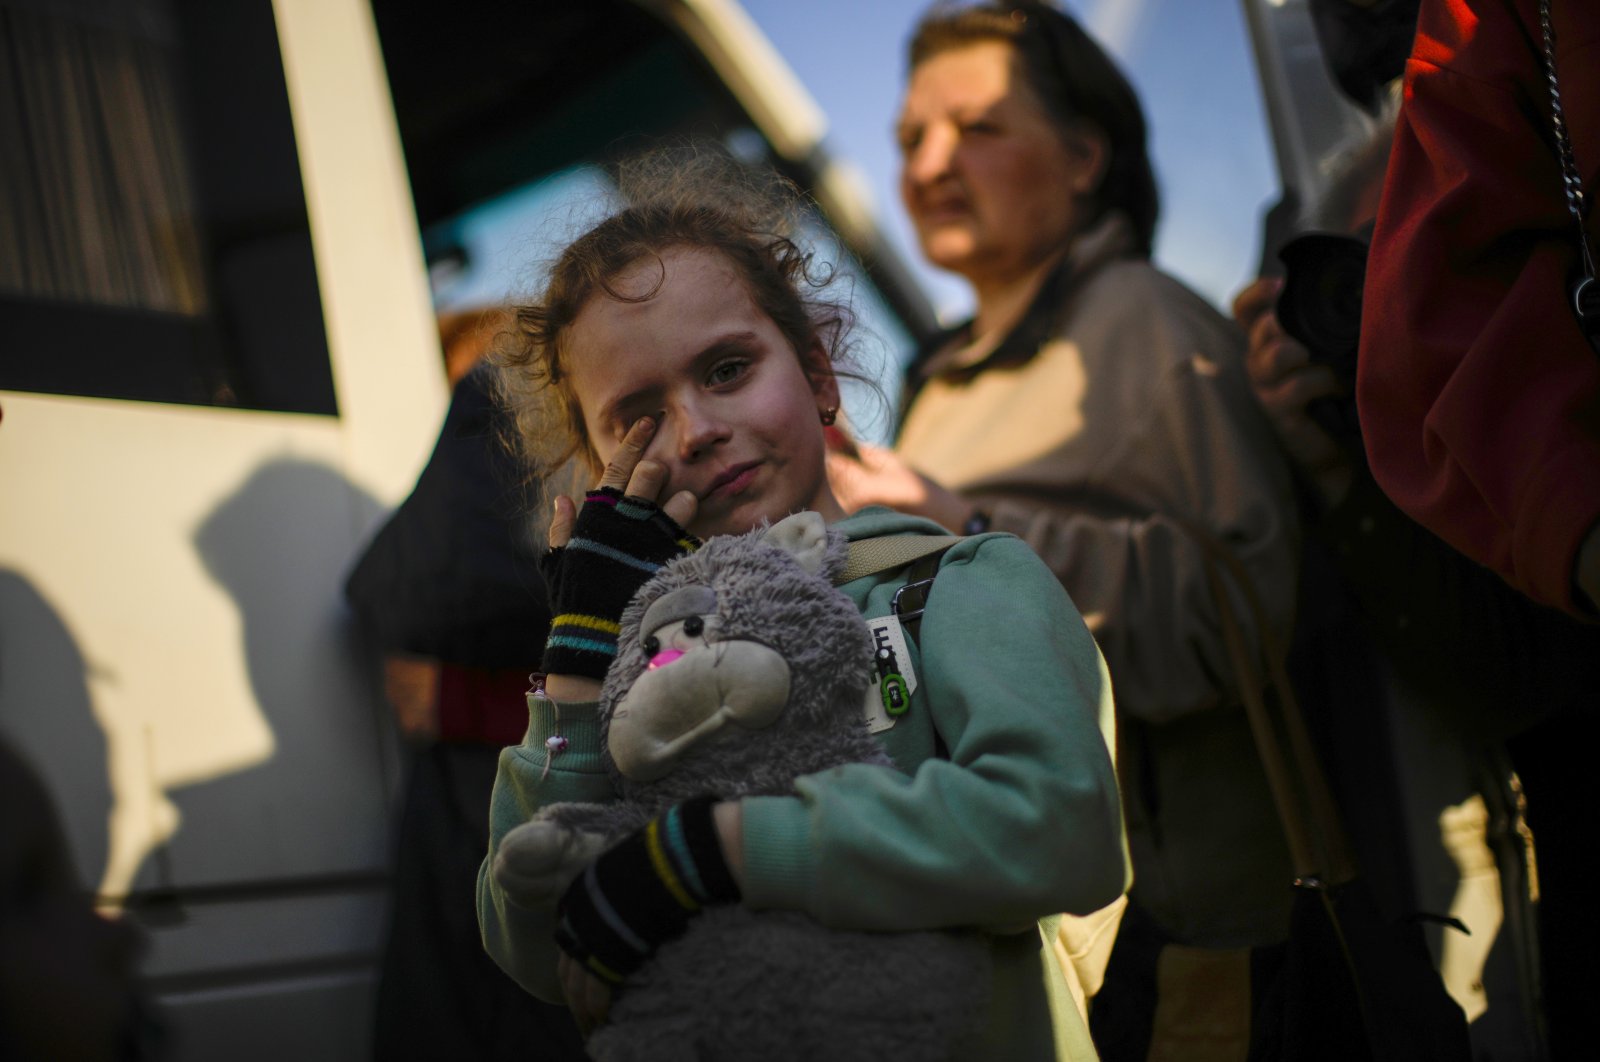 A child and her family who fled from Mariupol arrive at a reception center for displaced people in Zaporizhzhia, Ukraine, May 8, 2022. (AP Photo)